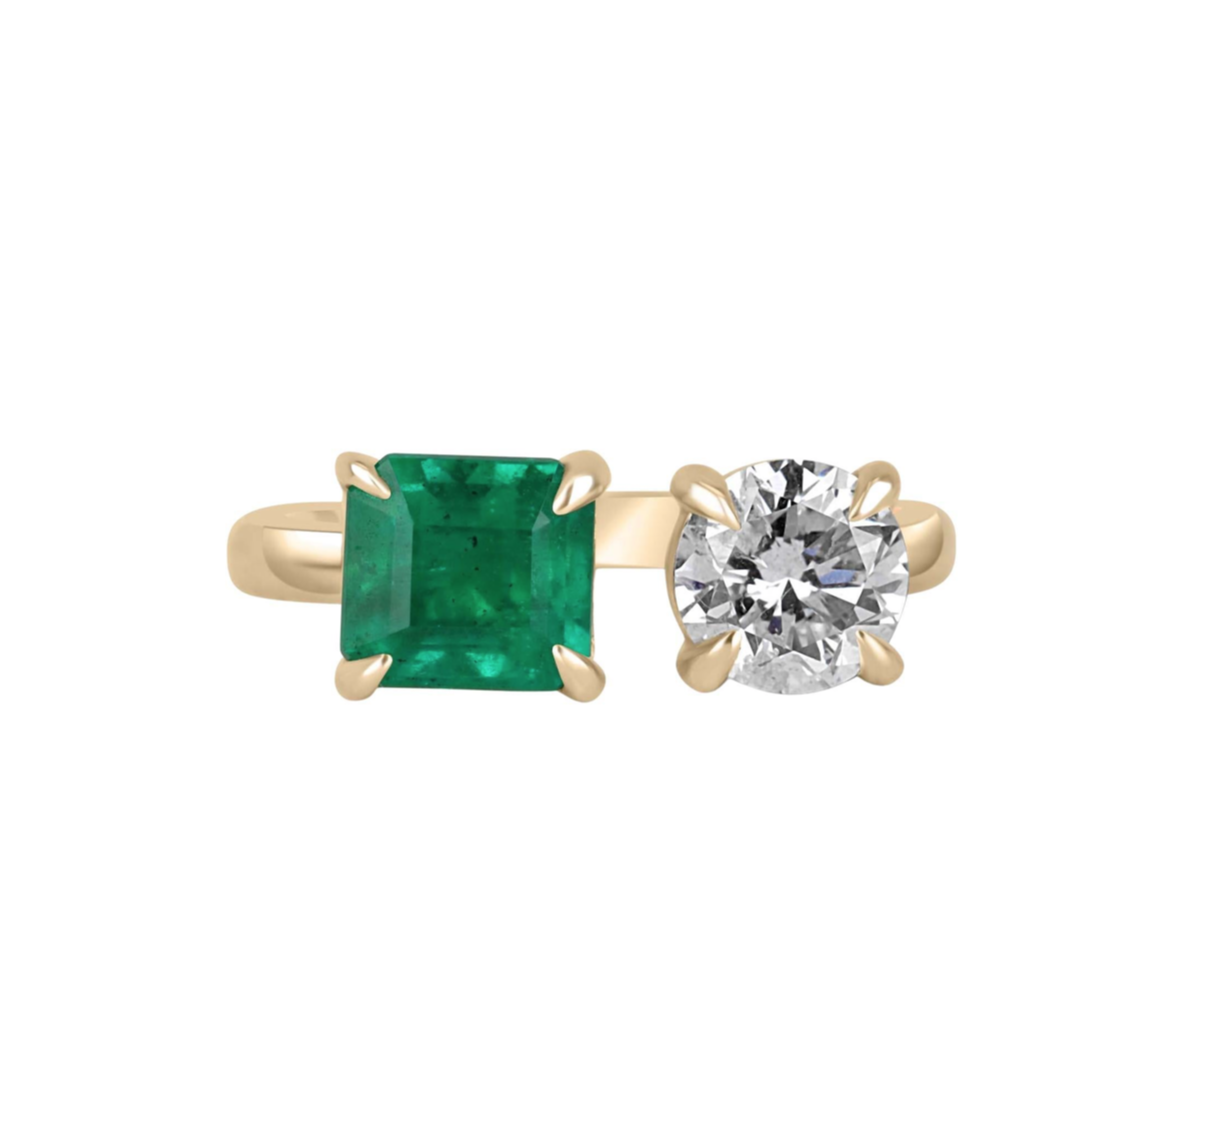 Emerald and diamond Tot et Moi ring